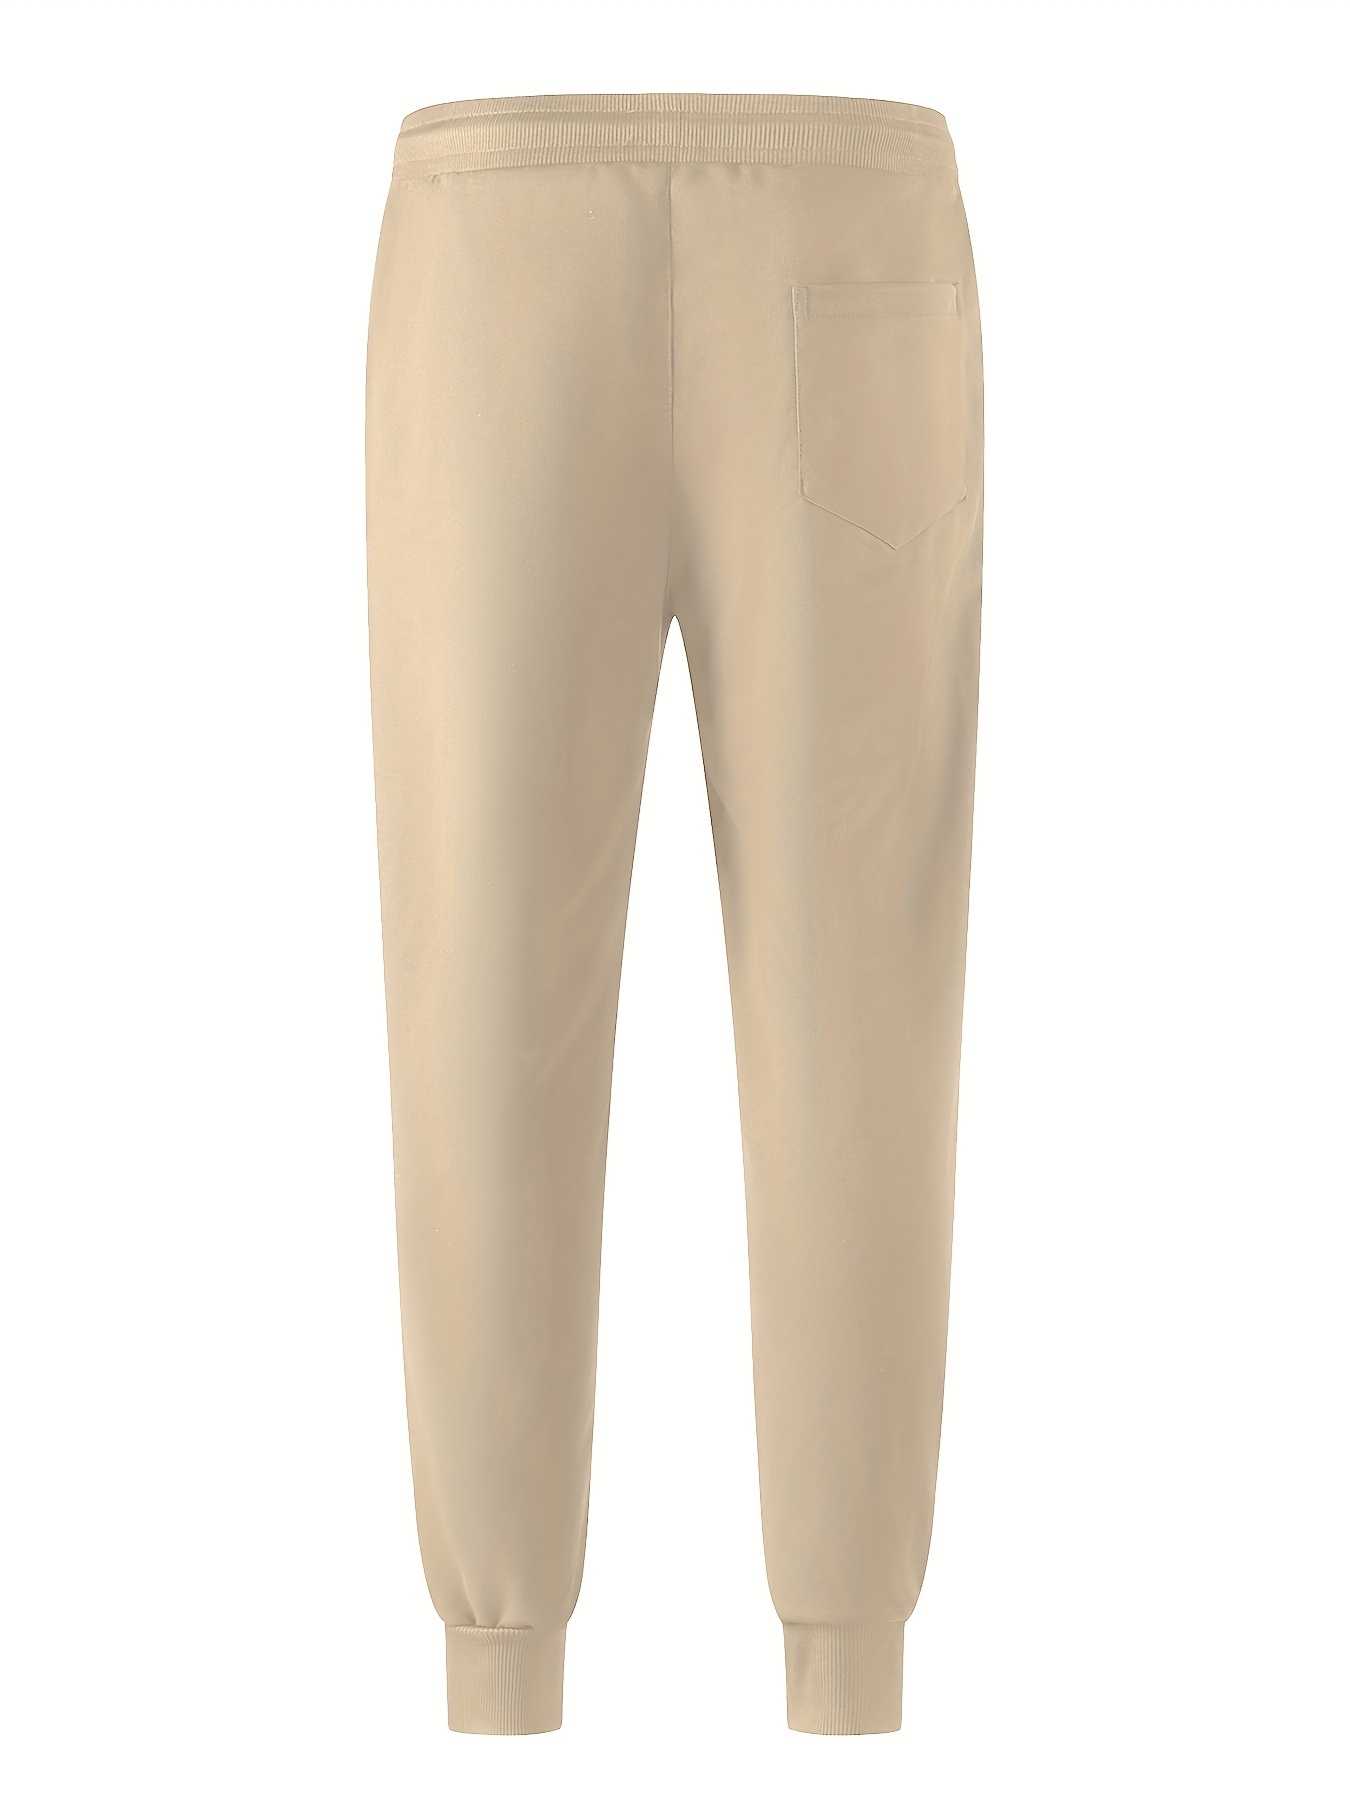 Relaxed Fit Track Pants - Beige - Men